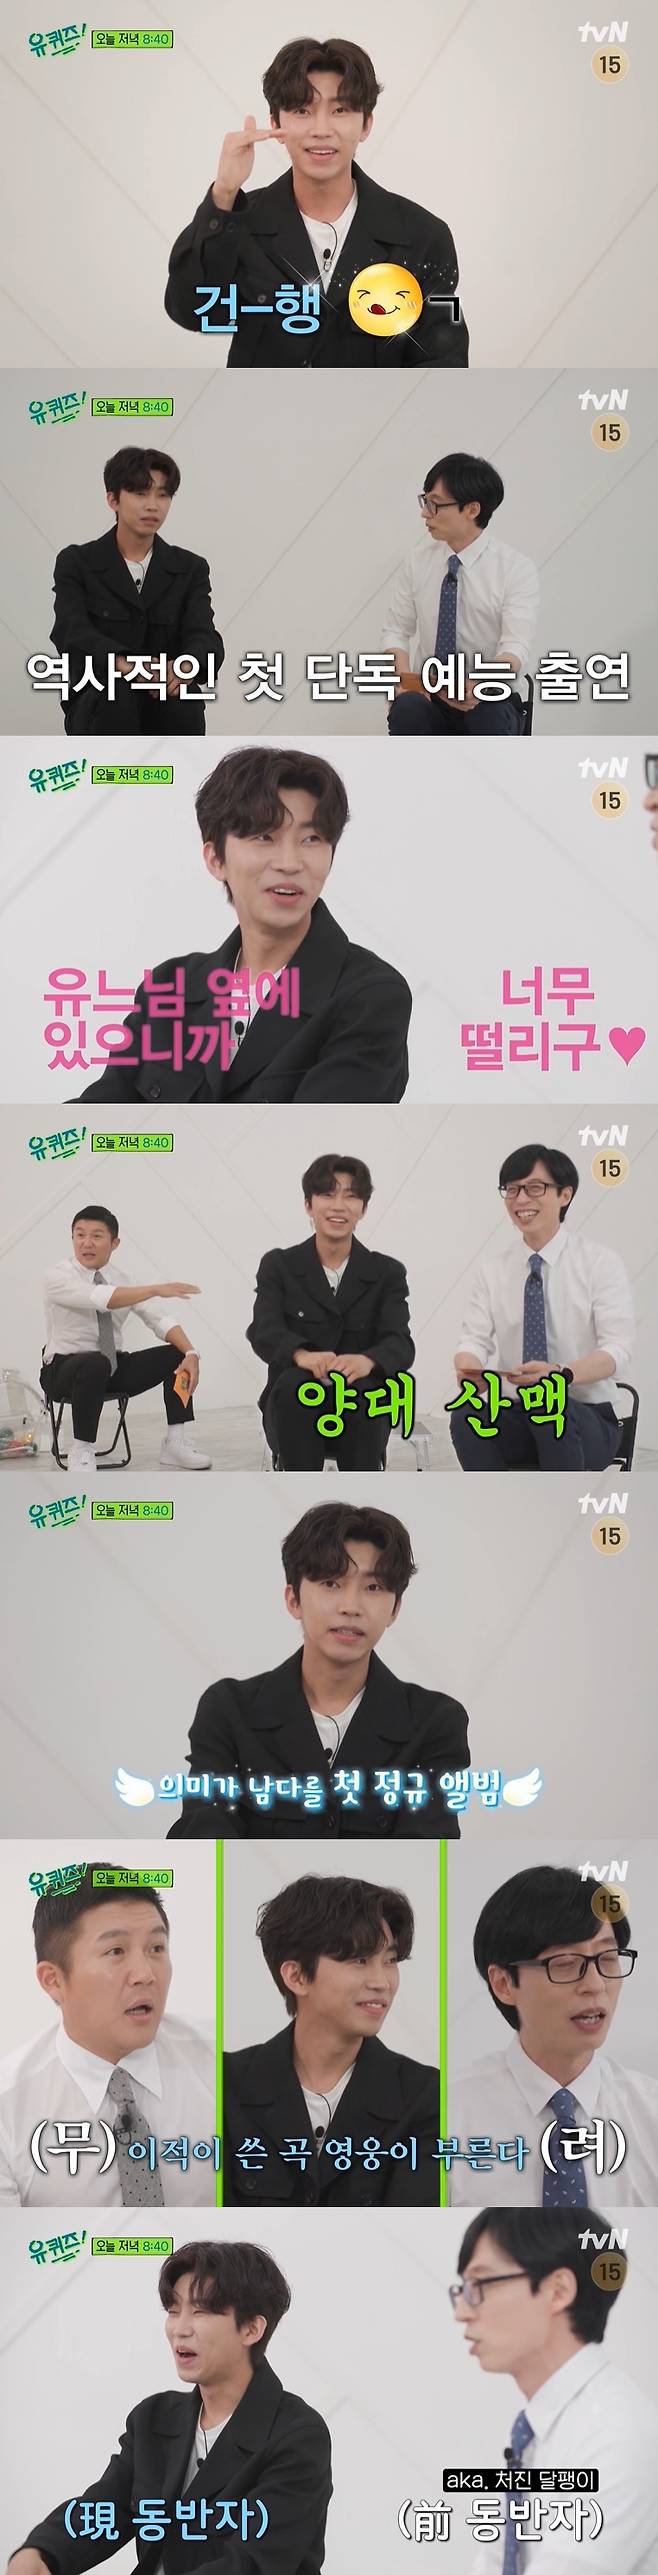 The first La rencontre (Bonjour Monsieur Courtet) between Lim Young-woong and Yo Jae-Suk was concluded.On May 4, TVN entertainment program You Quiz on the Block pre-released a video of Lim Young-woong, which will be released on the show.With Yo Jae-Suk and Jo Se-ho gladly greeting the appearance of Lim Young-woong, Jo Se-ho followed Lim Young-woongs greeting law of health and happiness.Lim Young-wong, the first solo entertainer, asked about his performance, saying, I am nervous and I do not think anything.Im very nervous because Im next to Yo Jae Suk.Jo Se-ho praised Lim Young-woong and Yo Jae-Suk, saying, It is two major mountain ranges from my point of view.Yoo Jae-Suk said, I am the first to see a hero.Lim Young-woong said, A regular album is an album that can put a lot of stories I want to do.It is good in that I can convey a lot of stories that can repay the great love I am receiving. Yoo Jae-Suk asked, Is my musical companion, my brother Lee Juck, wrote a tittle song?I met Lee Juck a while ago, and he had a mouth in his ear, Jo Se-ho said.Yoo Jae-Suk said, The enemy does not give a song to another person.I did not listen to it because I wrote one more snail snail, and I wrote the title song of Lim Young-woong.There was a reason, and Lim Young-woong called the title song Can I meet again in sweet tone.